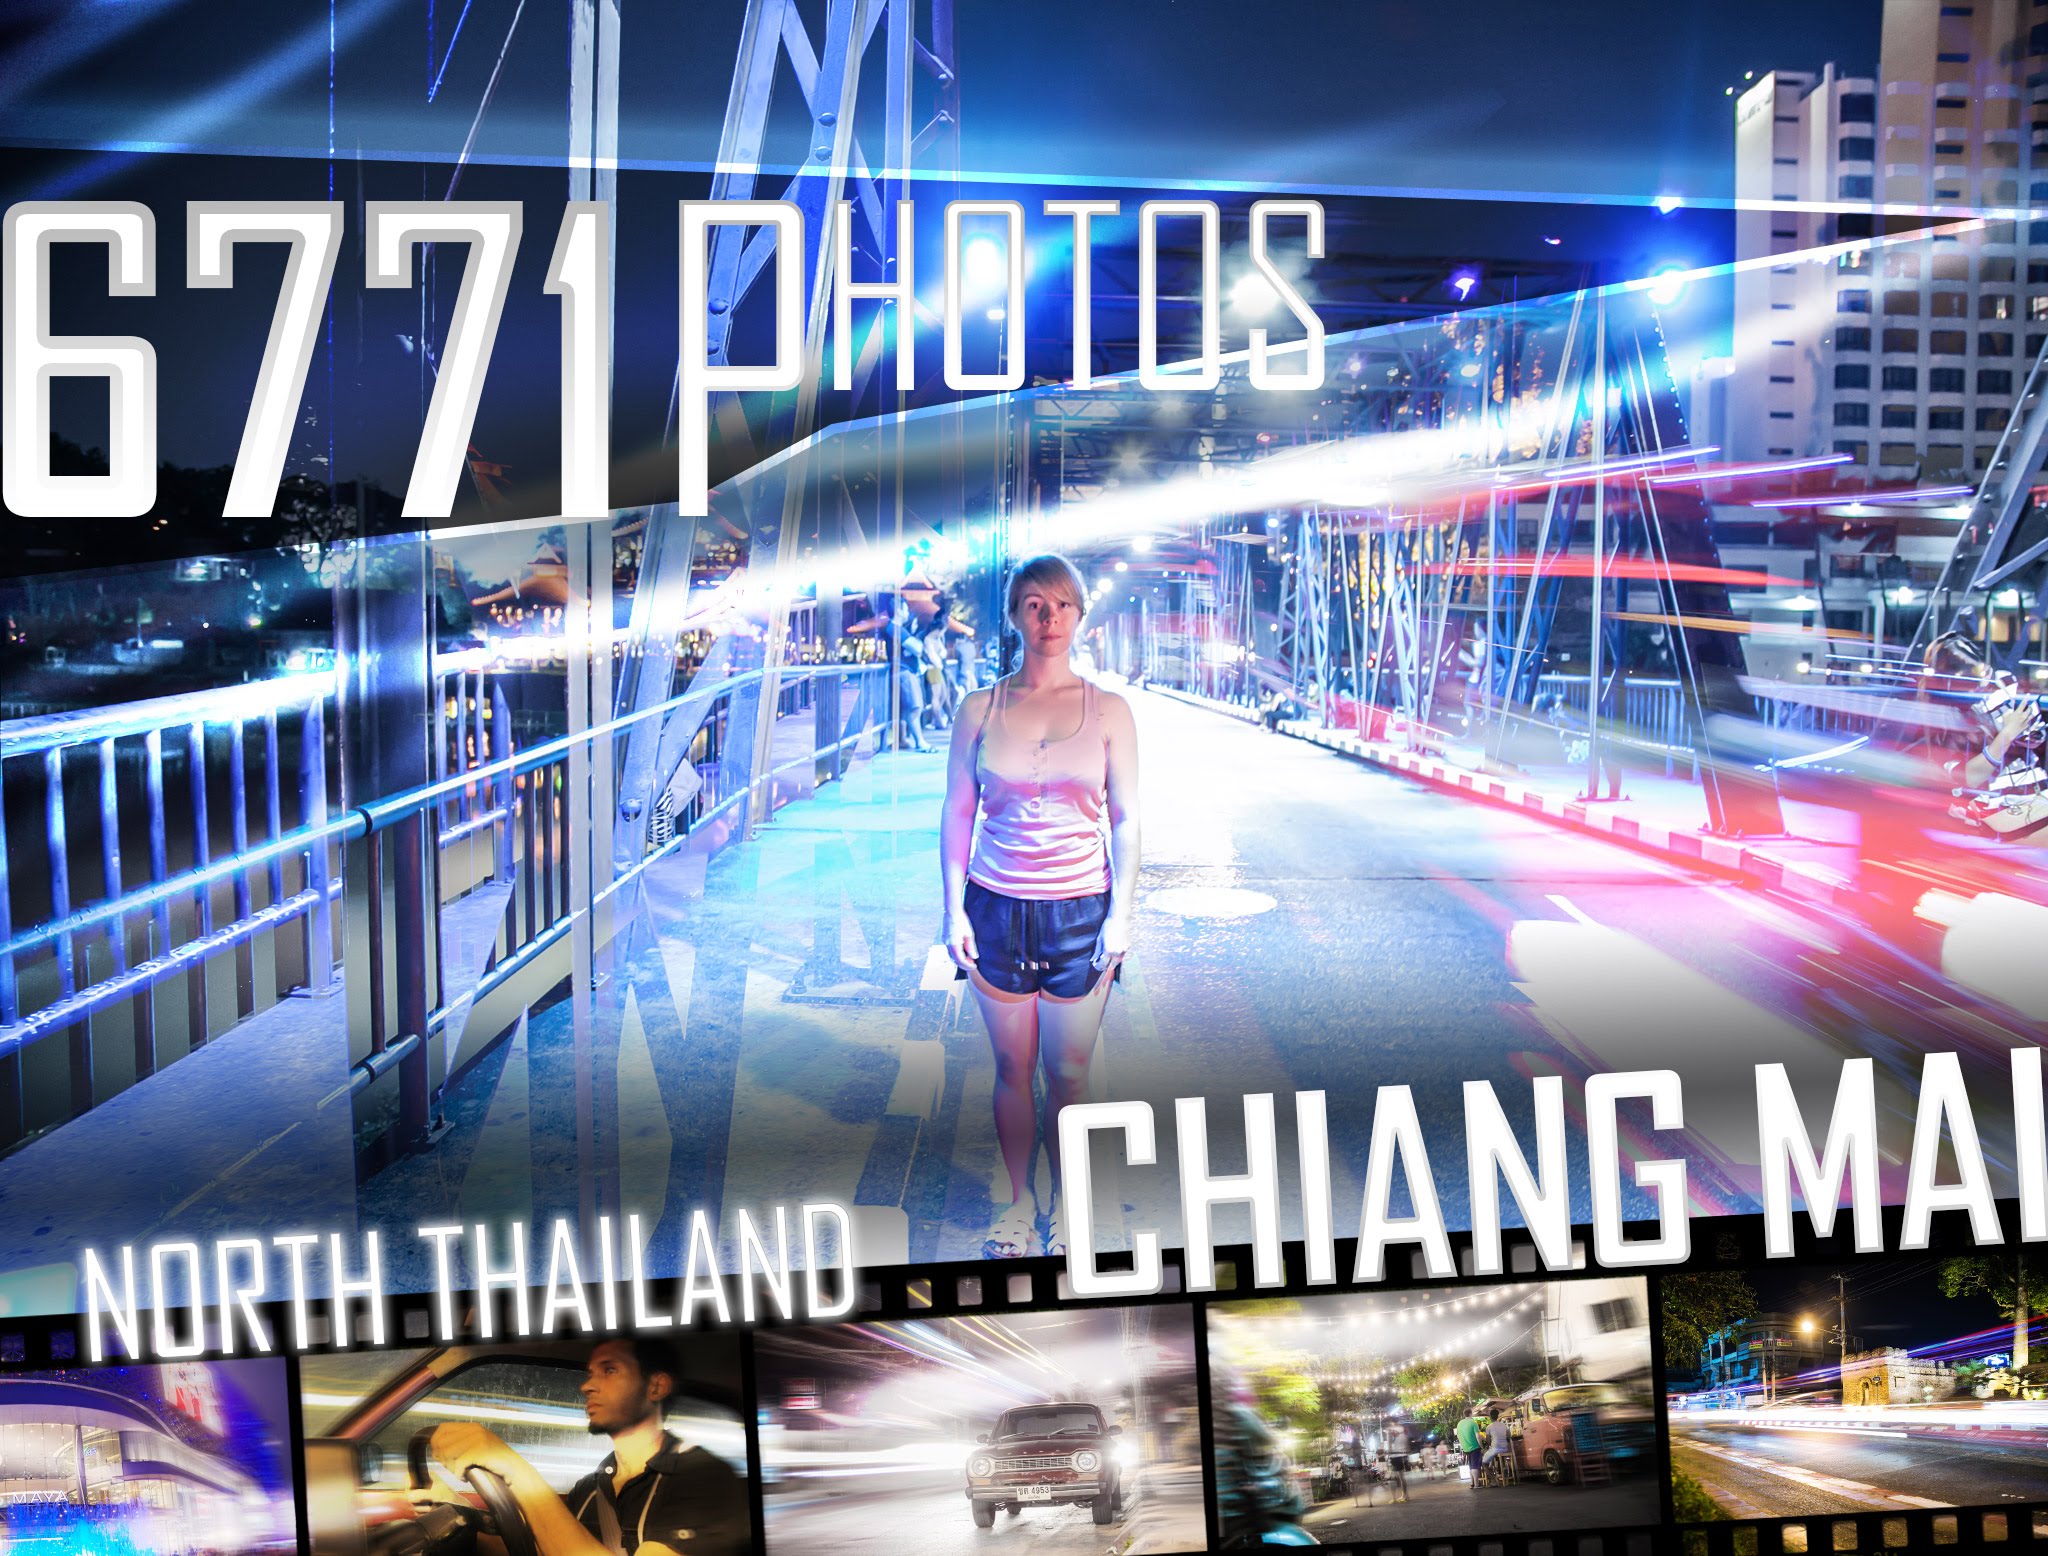 We took 6771 PHOTOS OF CHIANG MAI & NORTH THAILAND